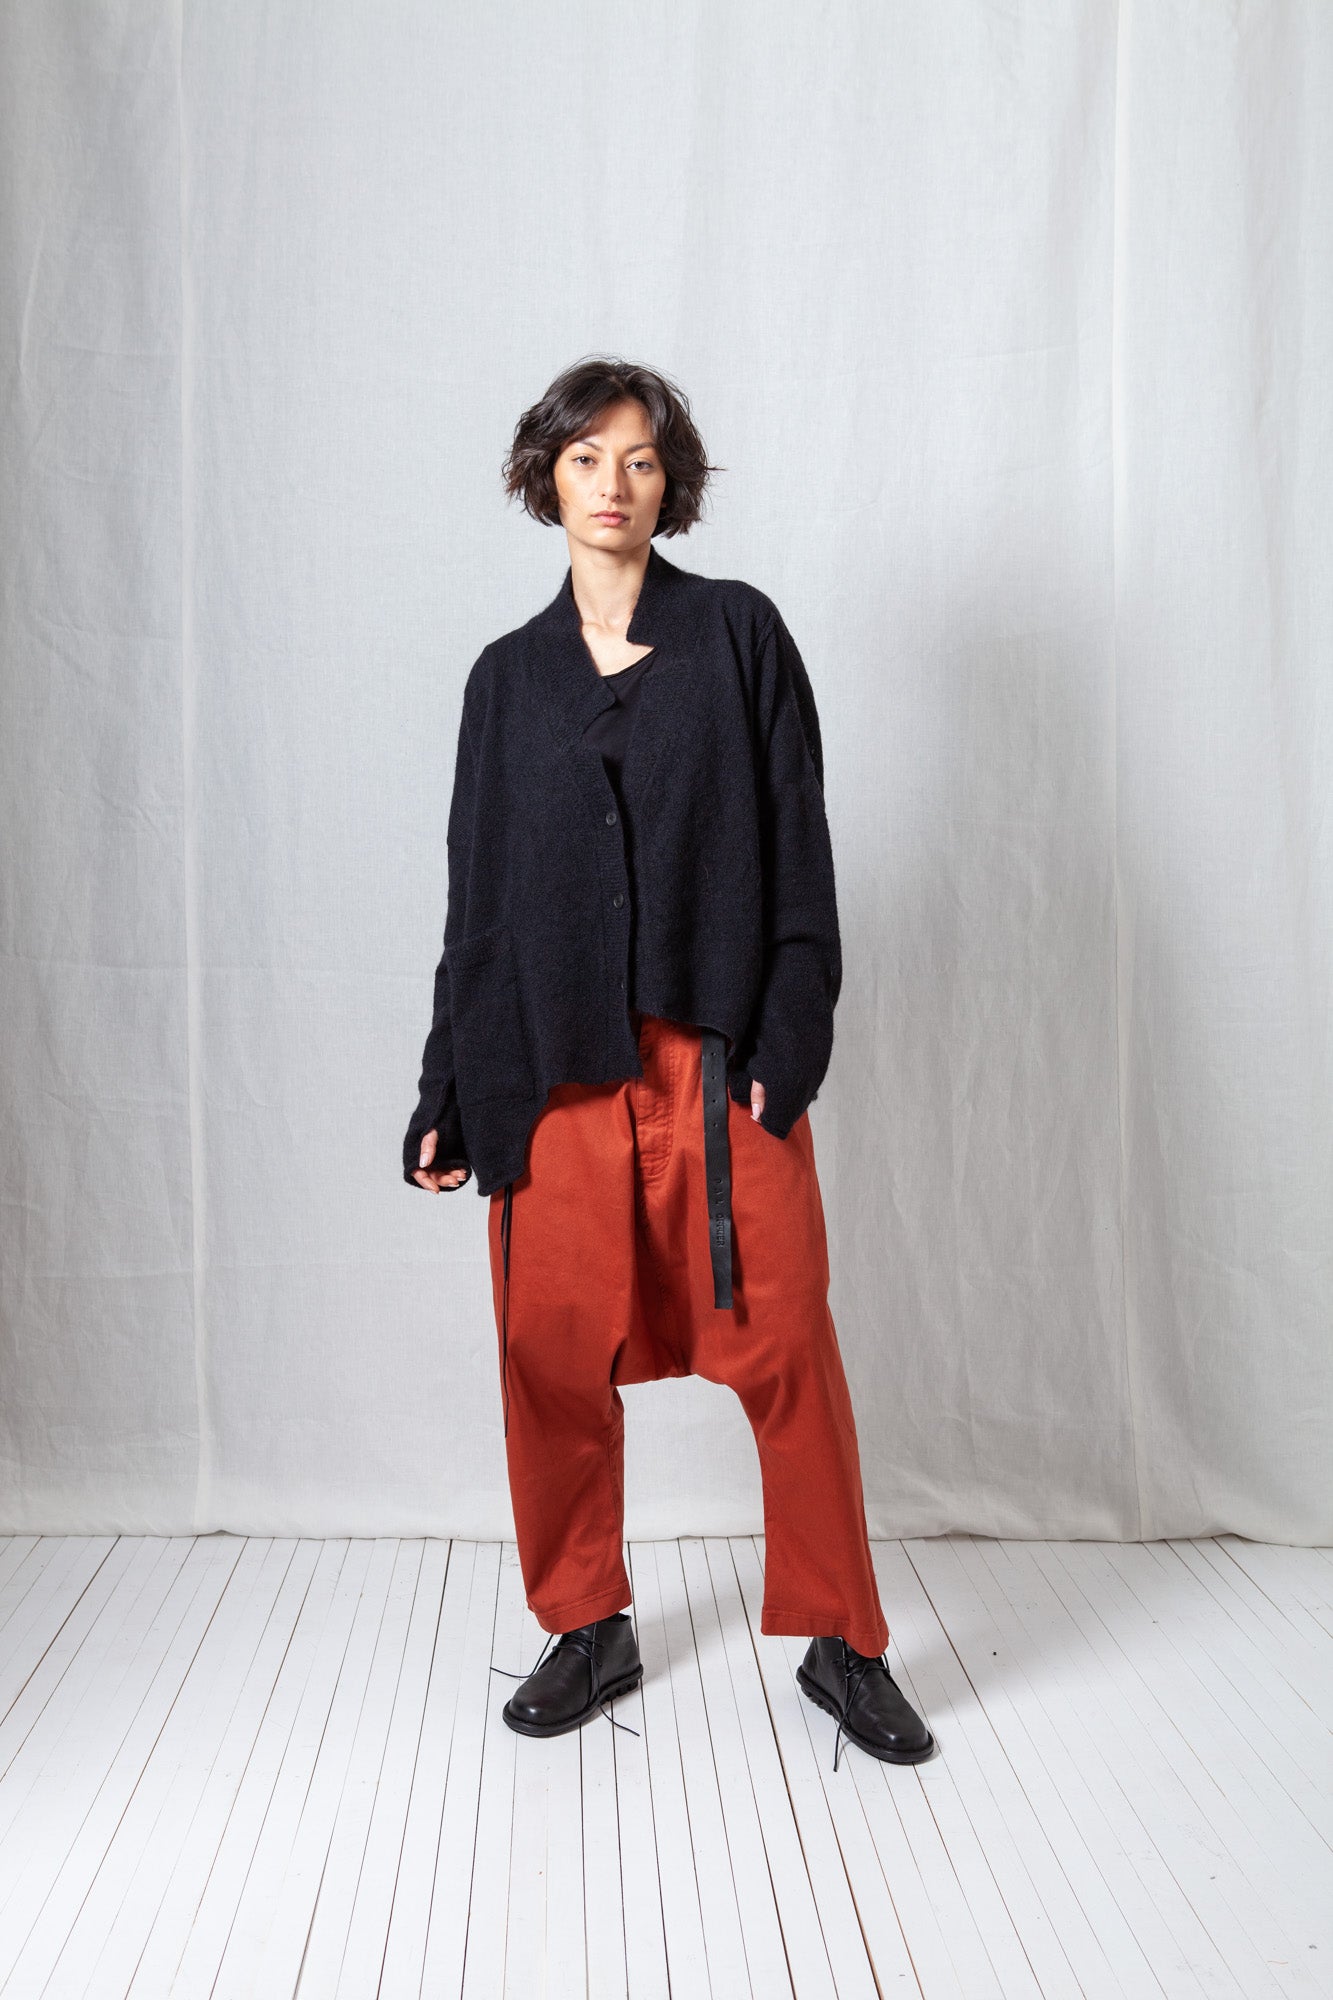 Cropped Cardigan_Loose Winter Knit